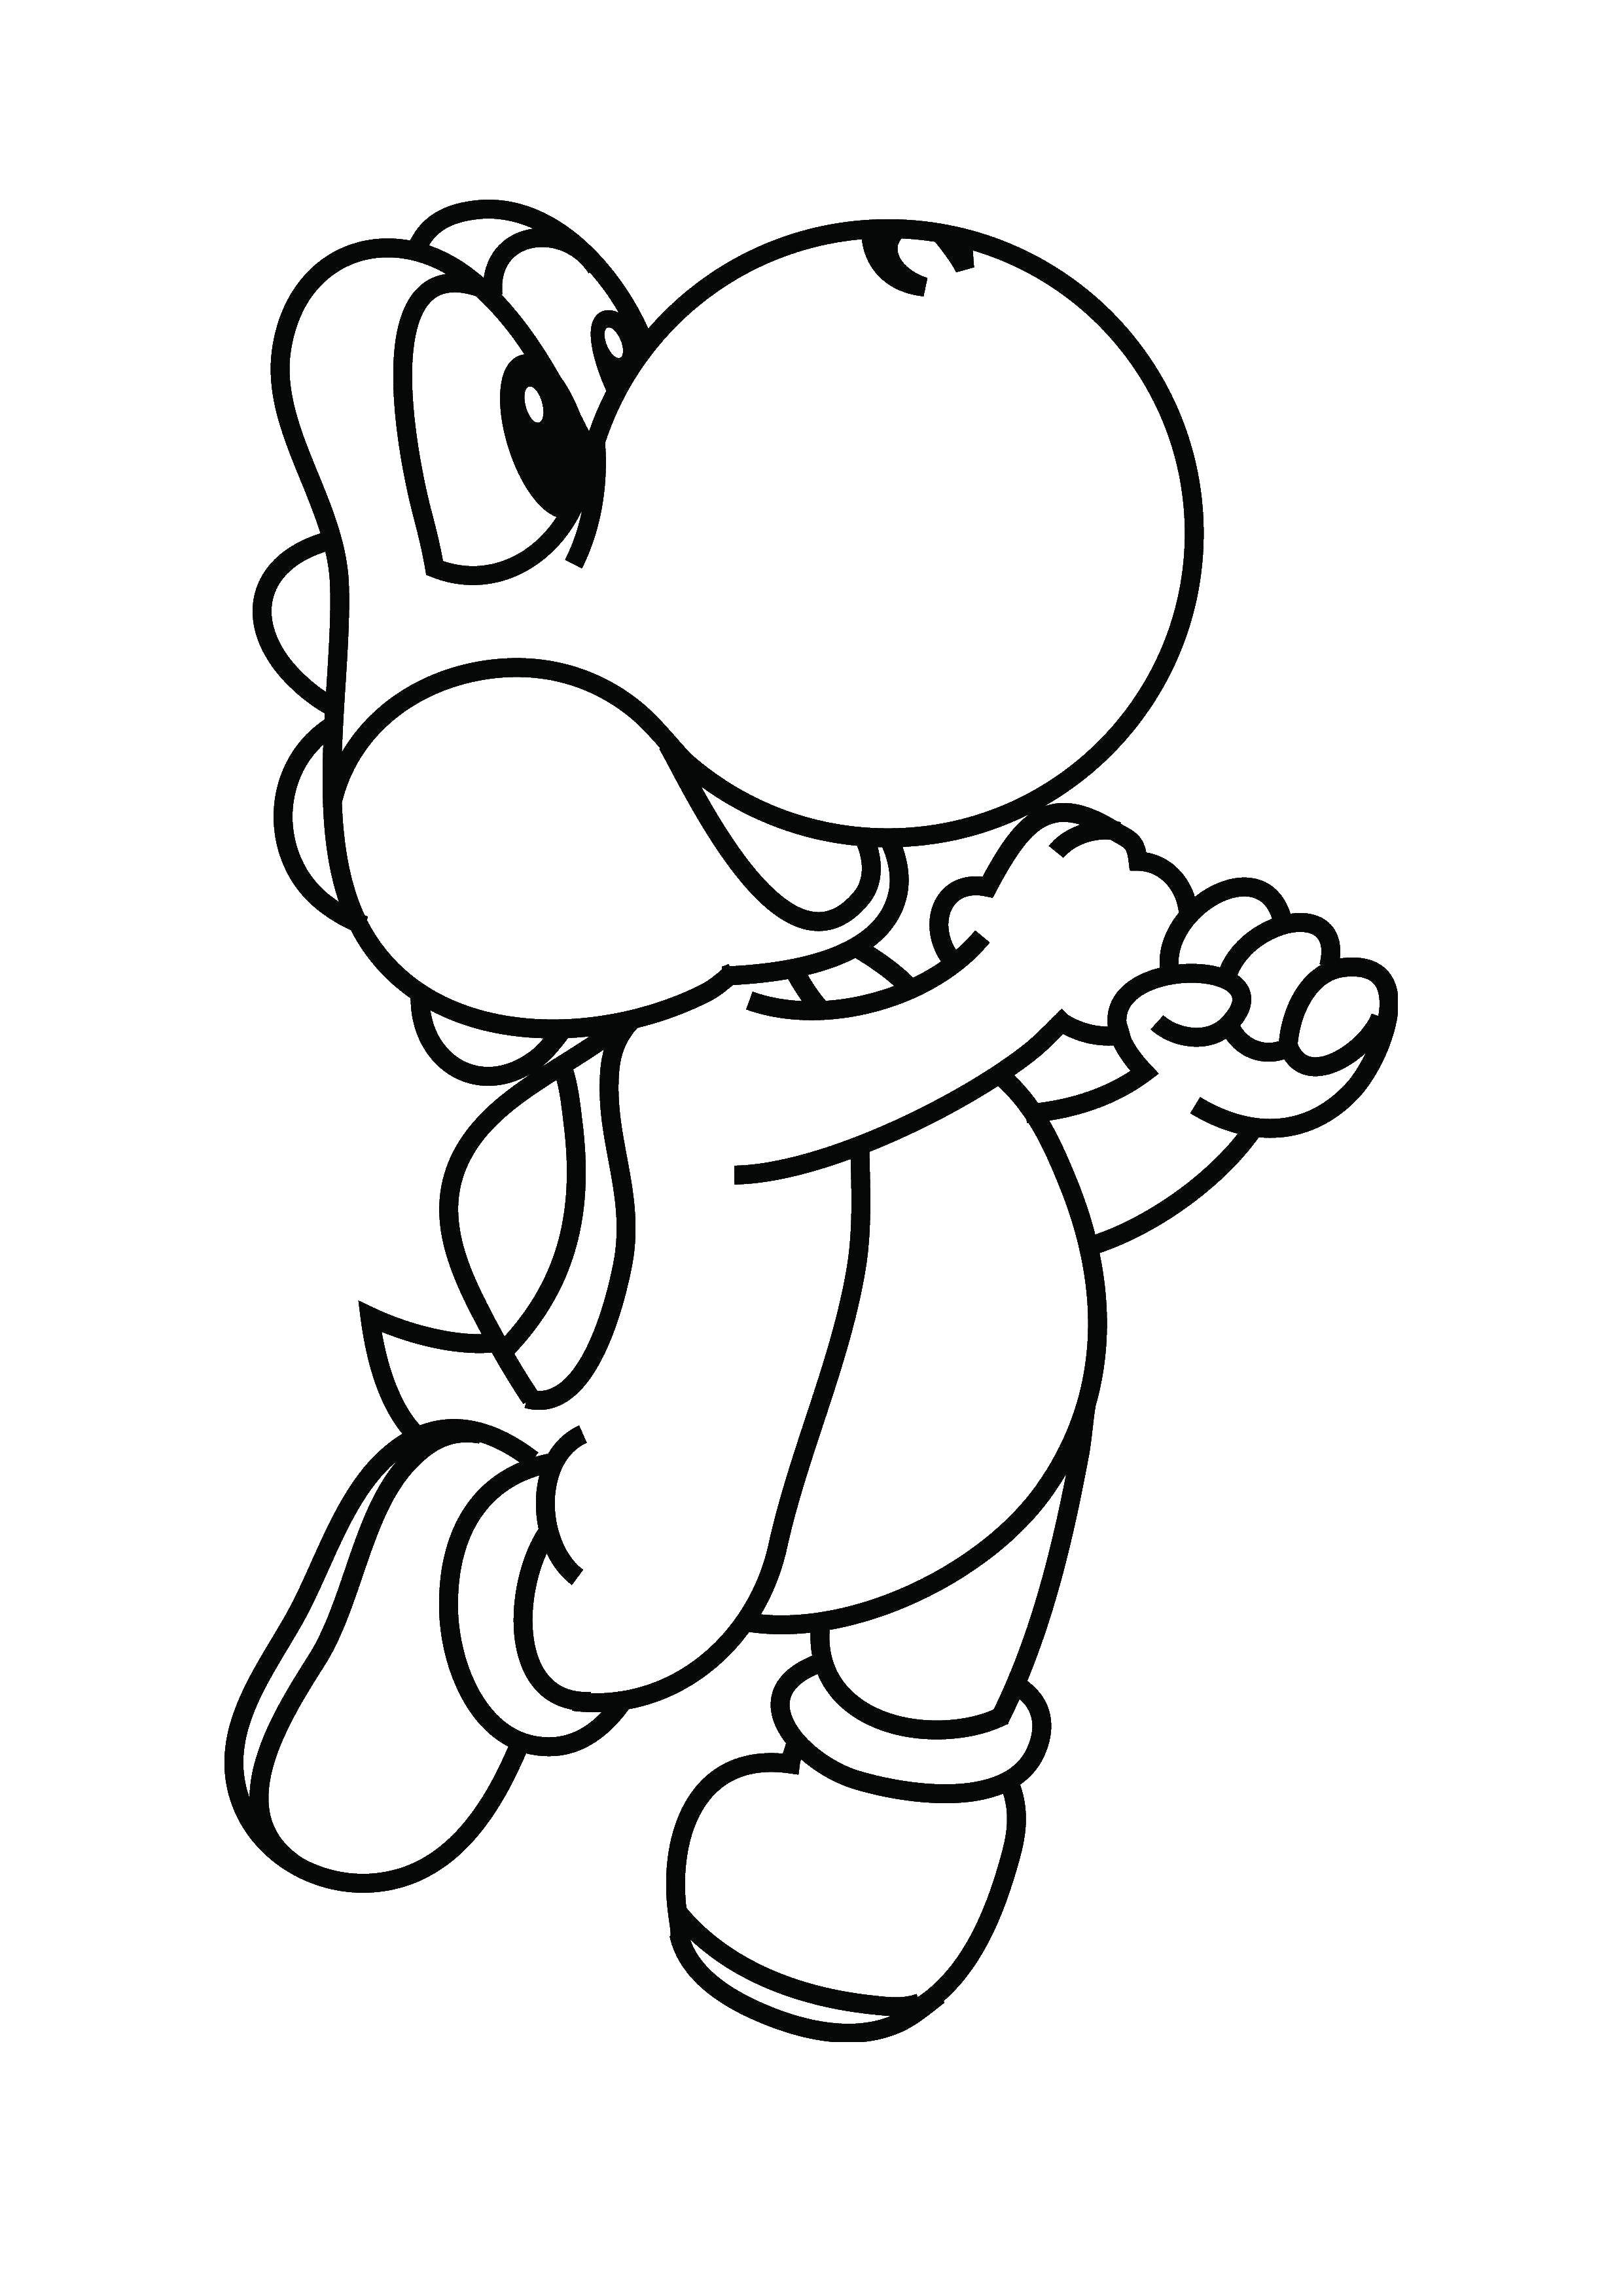 Coloring Dinosaur from Mario . Category The character from the game. Tags:  Games, Mario.